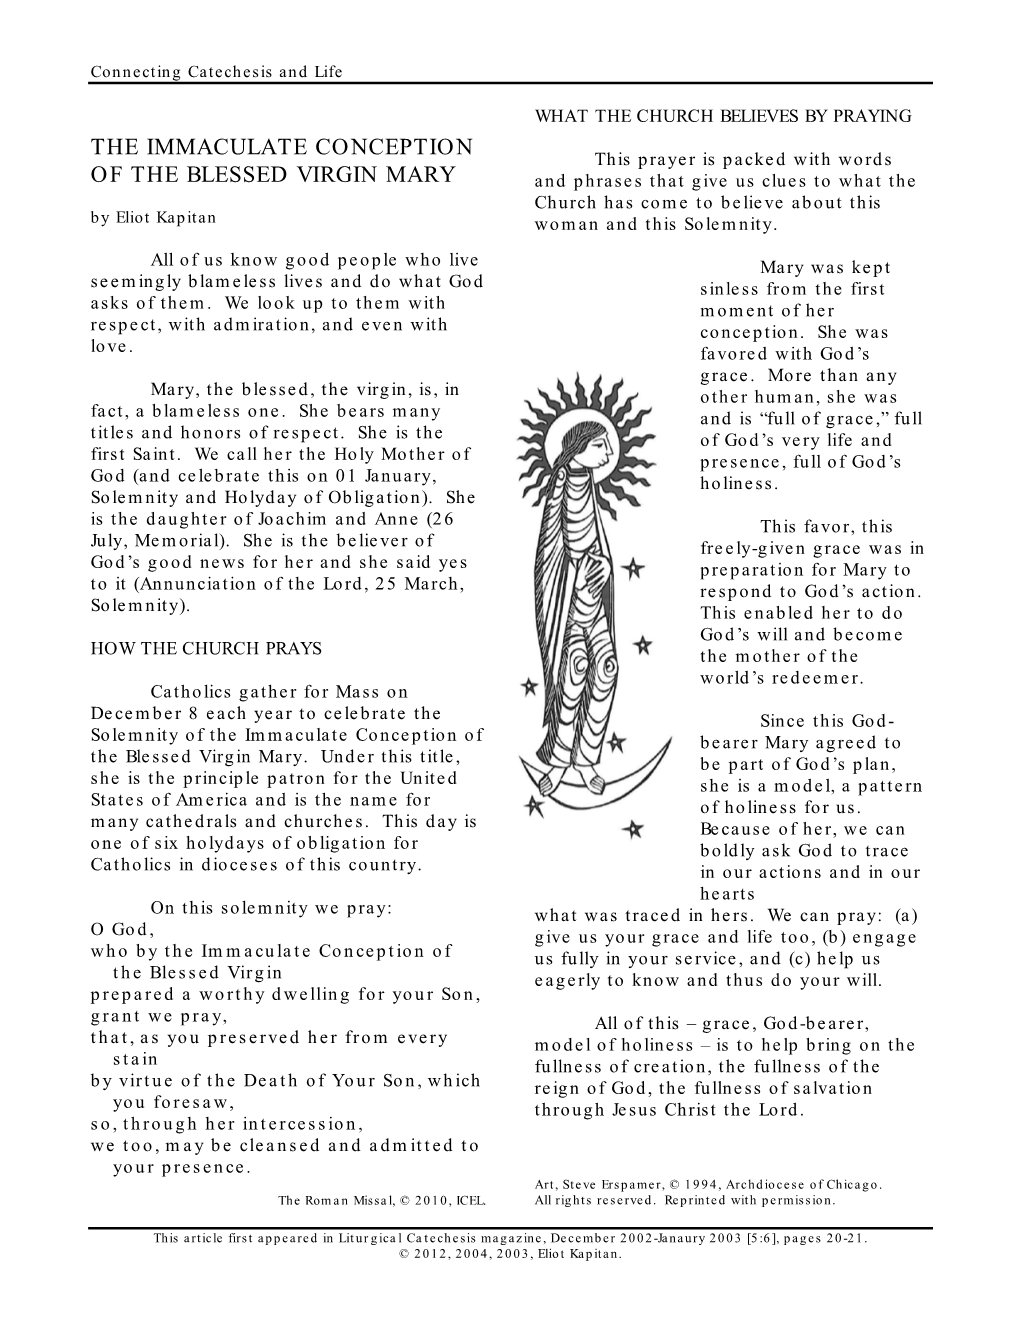 The Immaculate Conception of Bearer Mary Agreed to the Blessed Virgin Mary